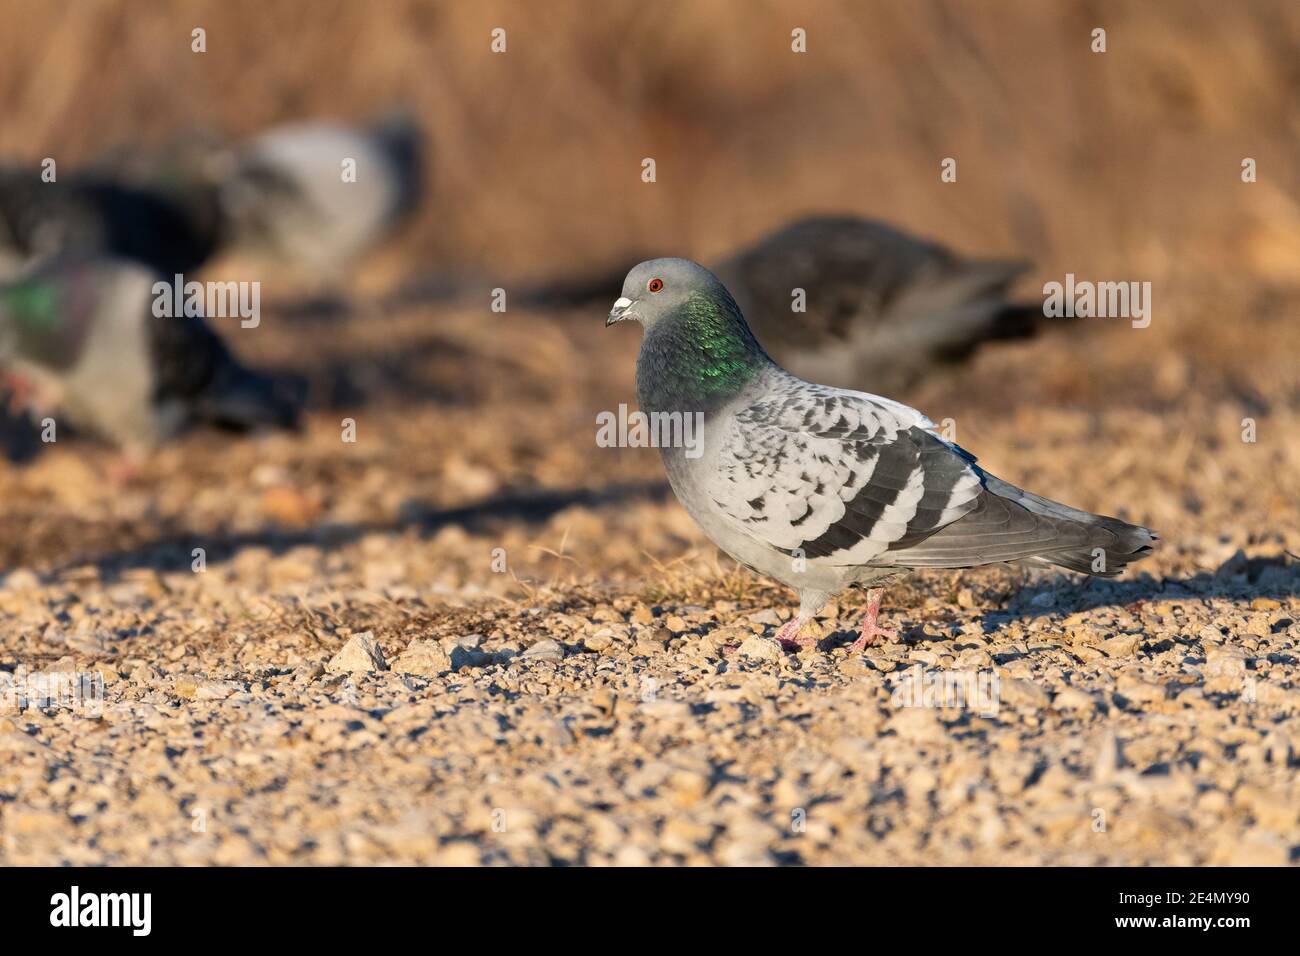 Rock Pigeon walking across a patch of dry, rocky ground while other members of its flock search for food in the background. Stock Photo